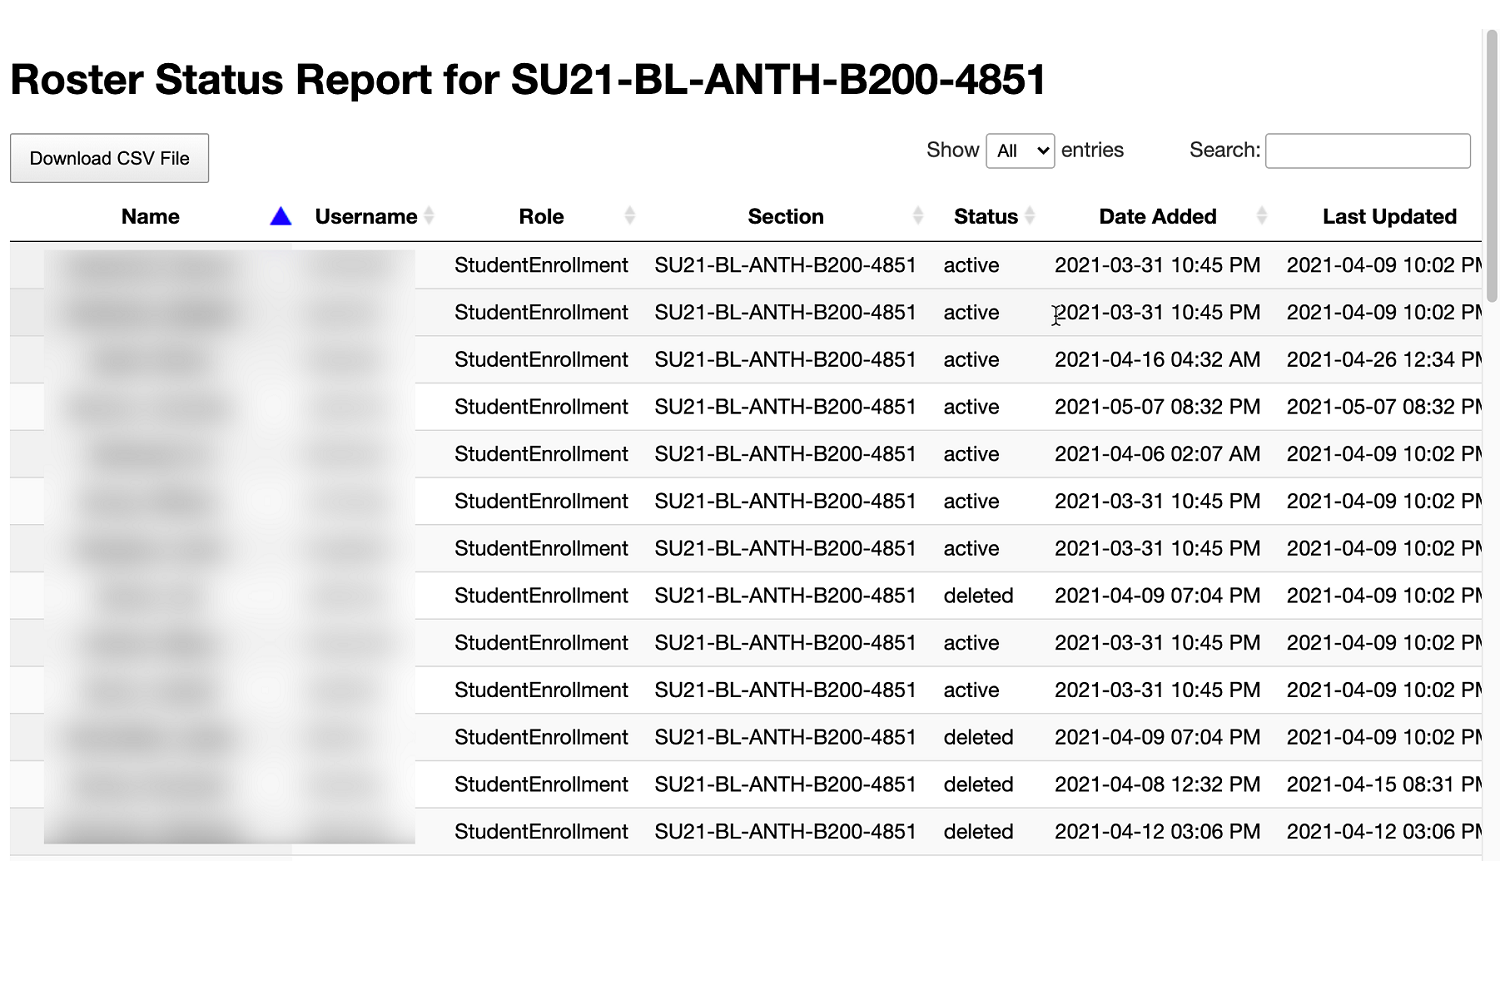 Image of sample roster status report with names and usernames obfuscated.